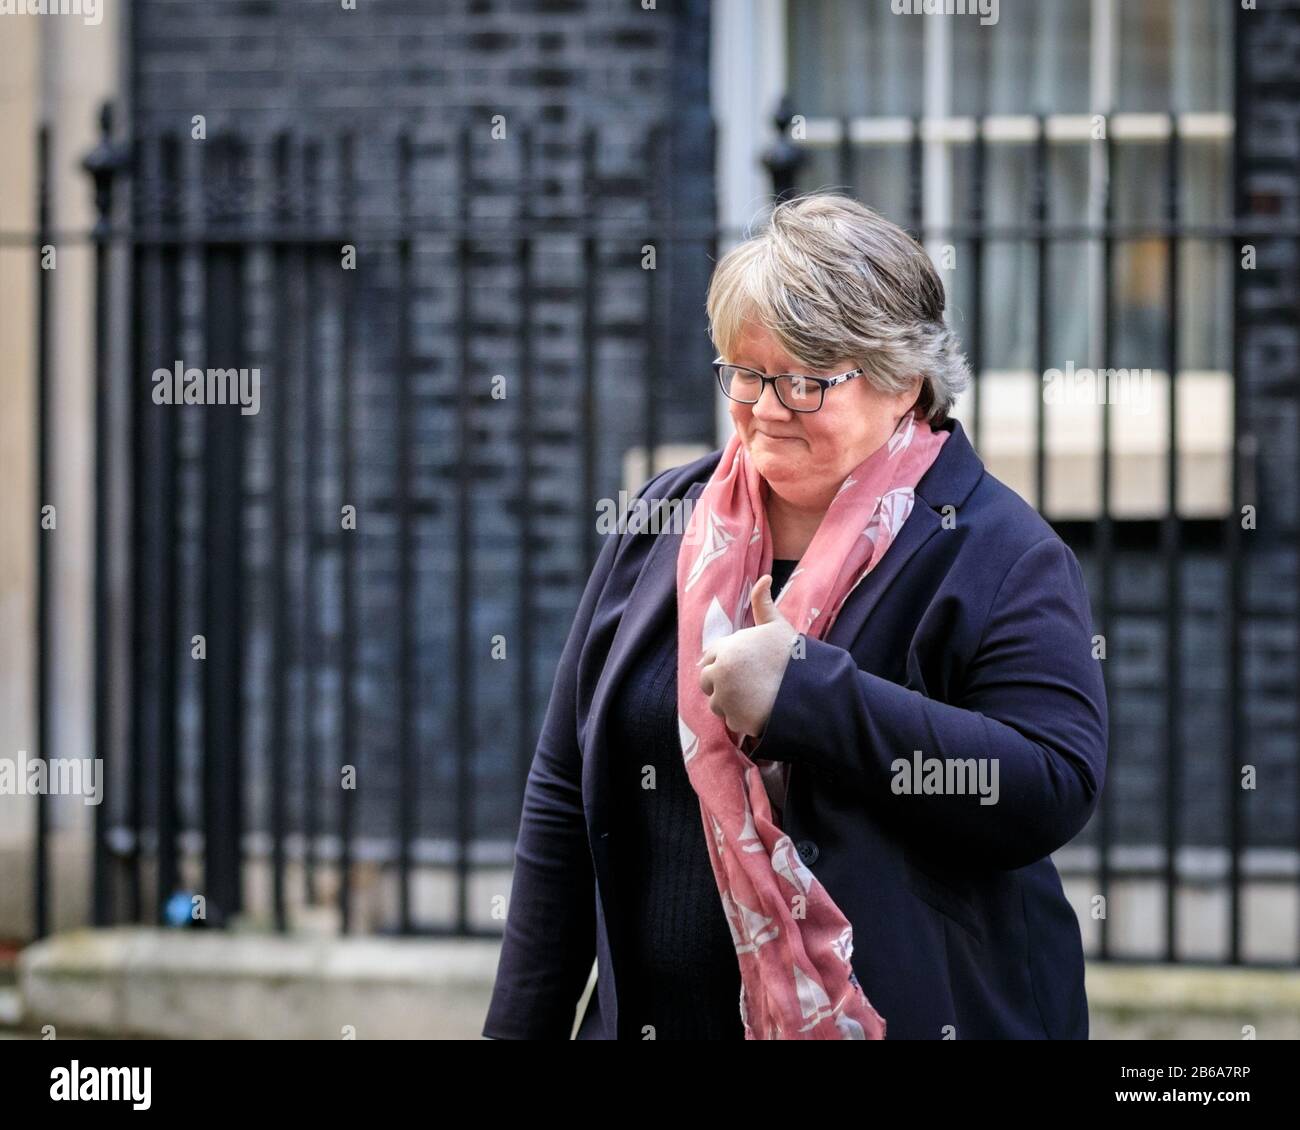 Downing Street, London, Thérèse Coffey gives a thumbs up sign and leaves No 10, she remains Secretary of State at the Department for Work and Pensions Stock Photo